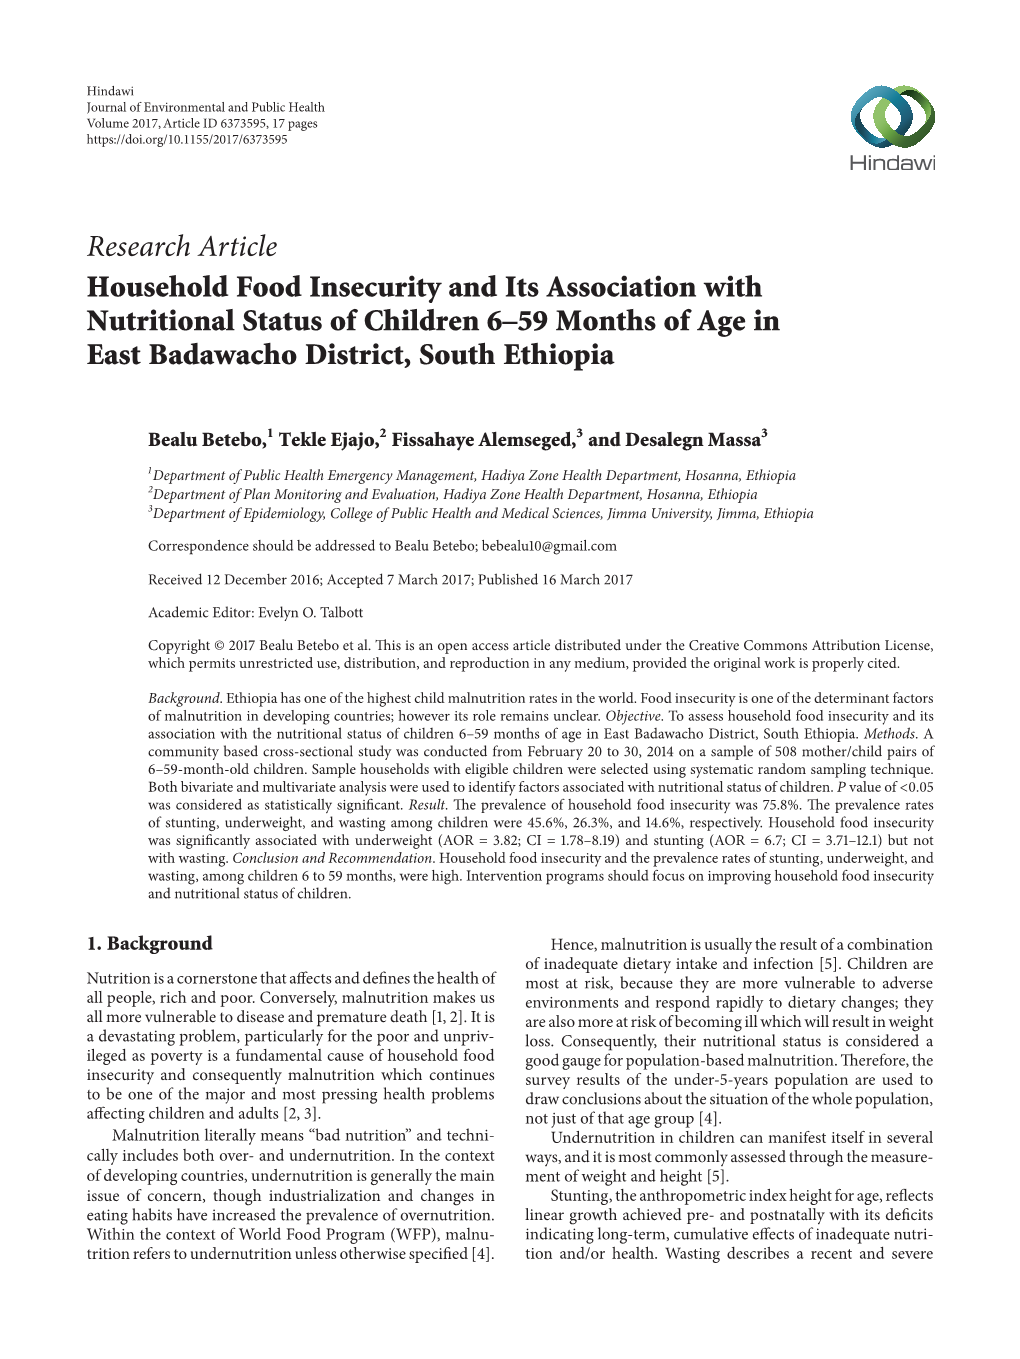 Research Article Household Food Insecurity and Its Association with Nutritional Status of Children 6–59 Months of Age in East Badawacho District, South Ethiopia